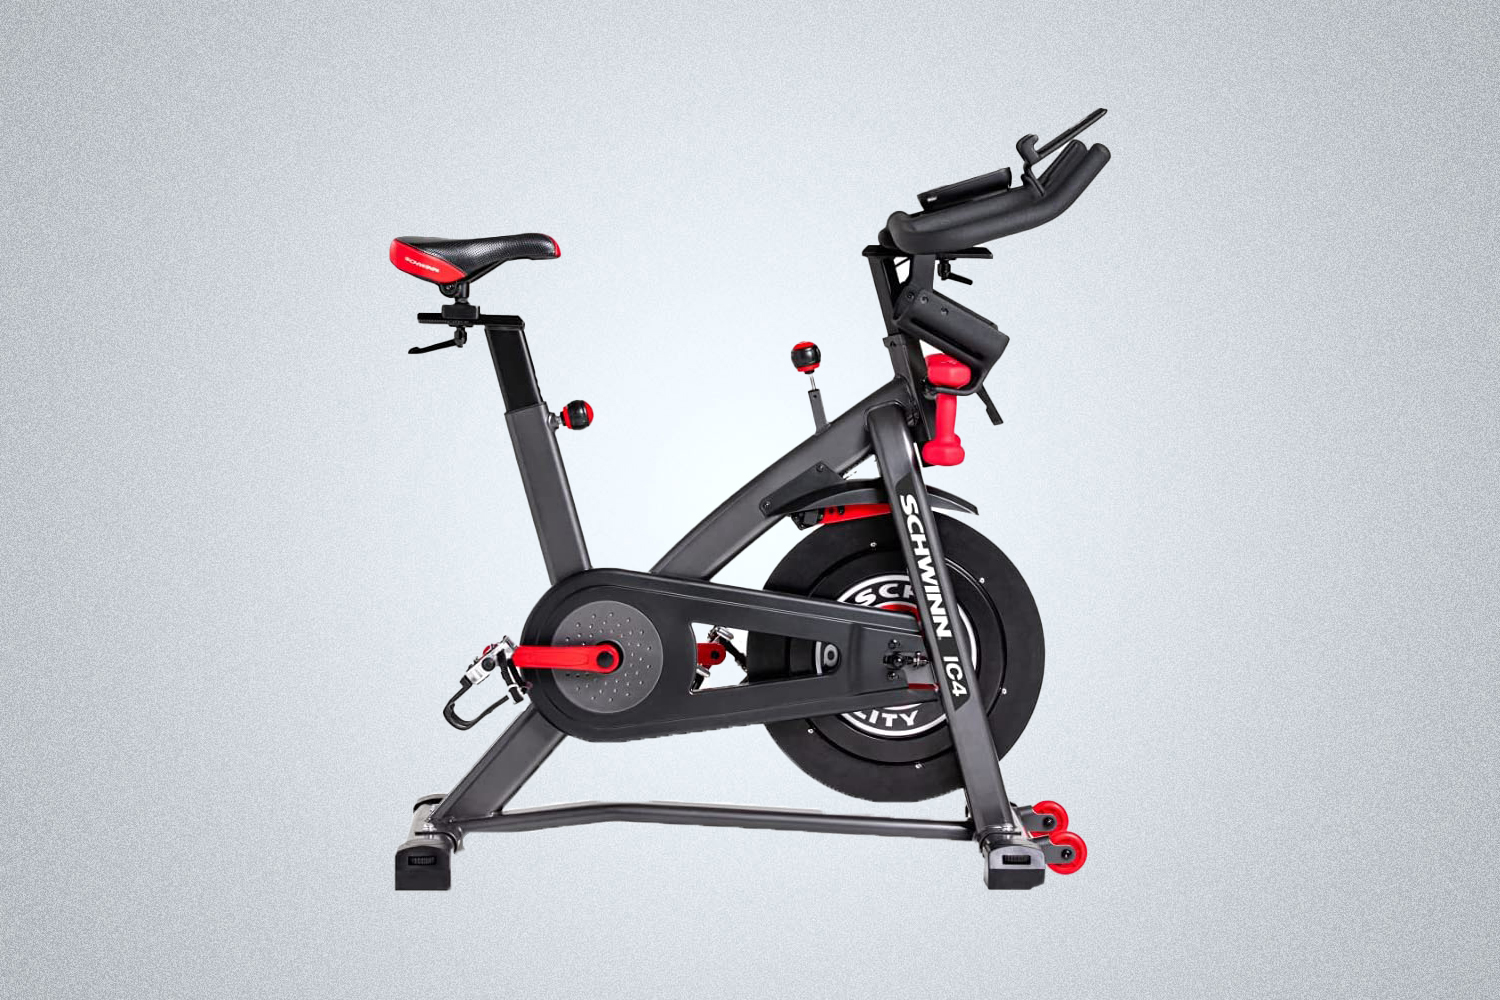 The Schwinn Fitness IC Bike Series is a stationary bike for intense cycling workouts from home